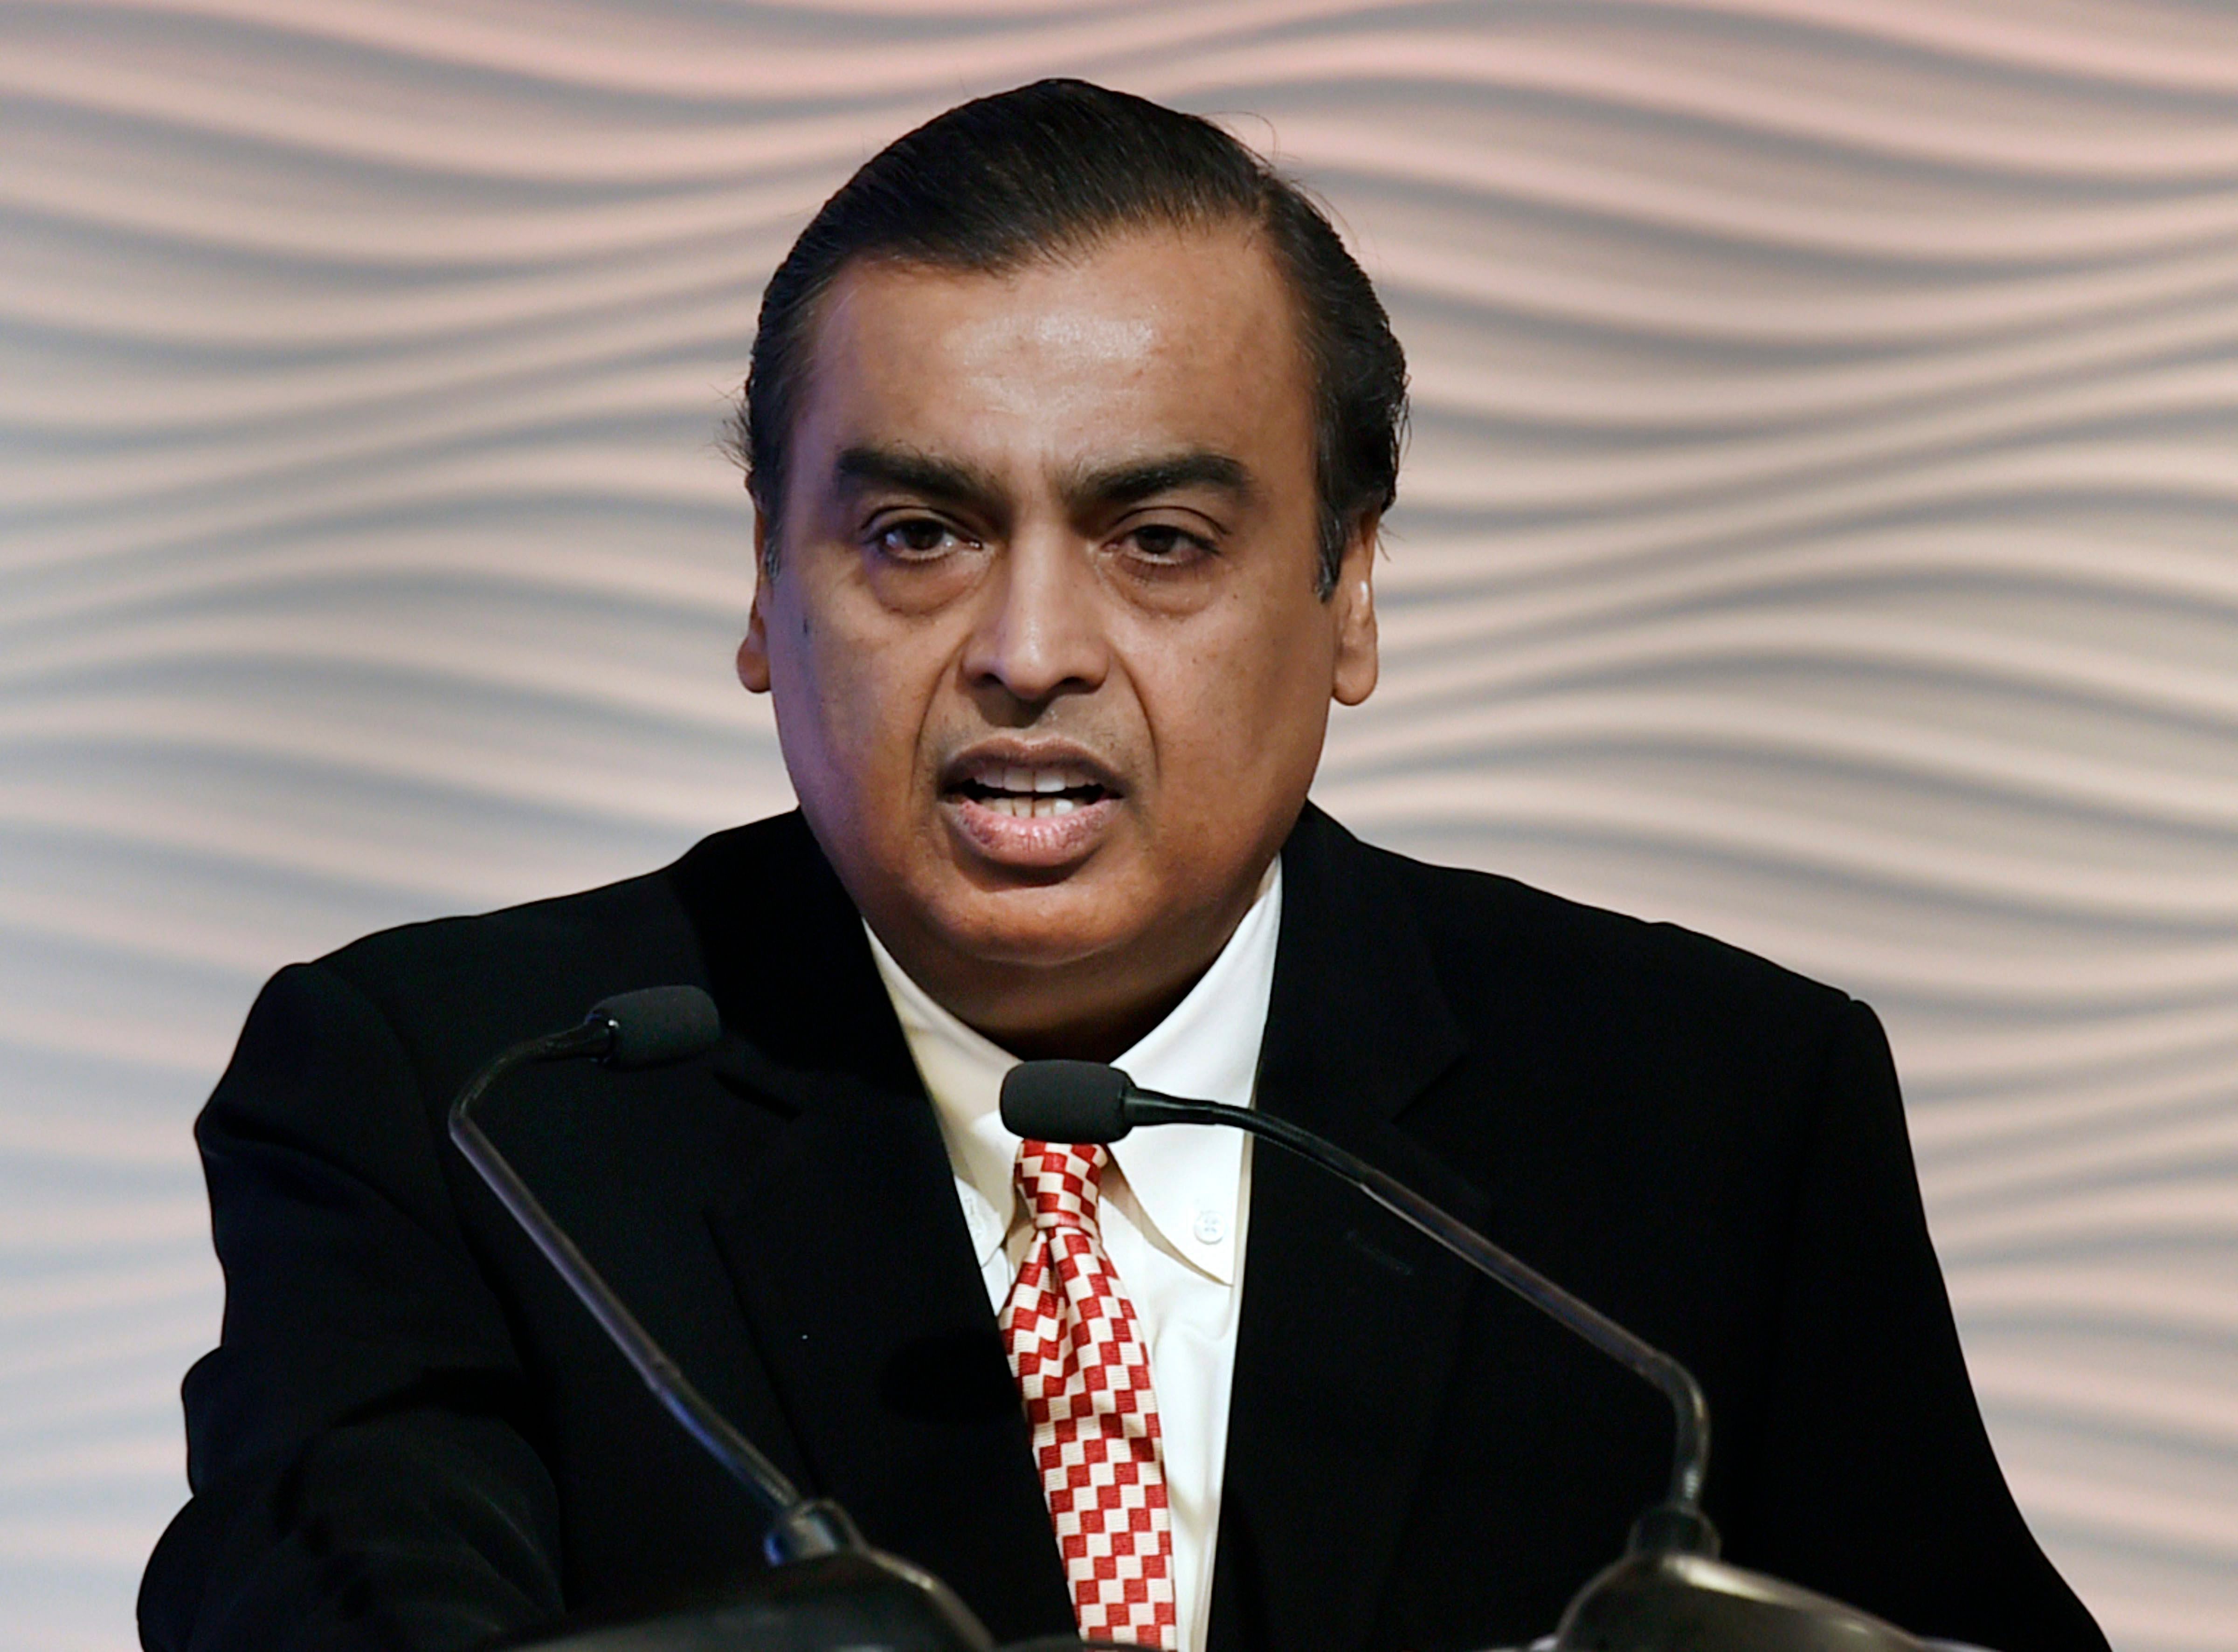 KKR said Friday its investment in Jio is it’s largest in Asia and that Ambani’s goals played a big role in a quick decision. (Credit: PTI Photo)